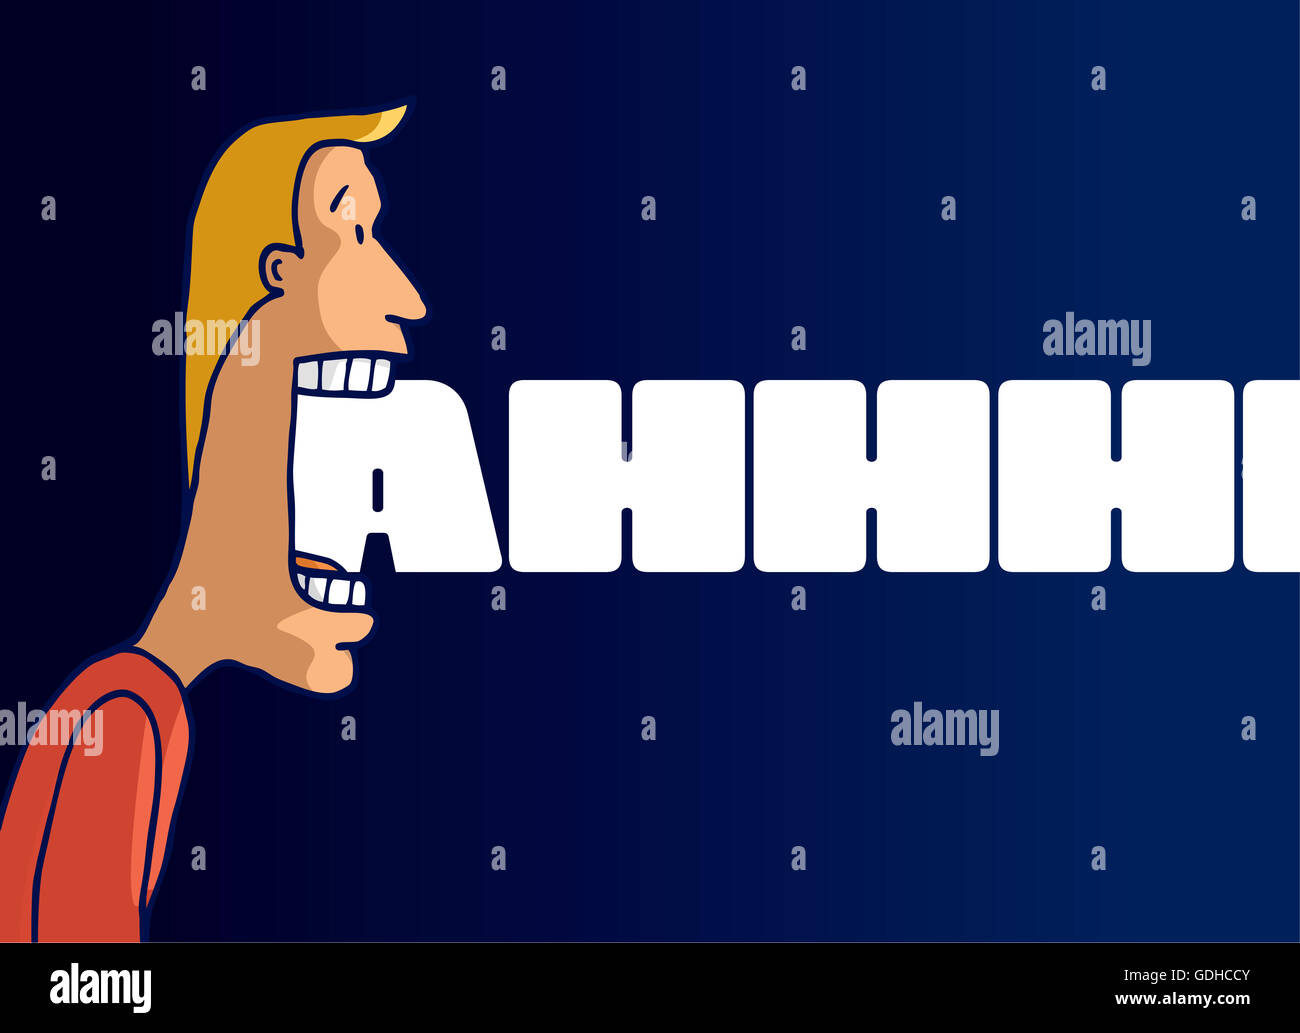 Cartoon illustration of scared man screaming loud letters Stock Photo